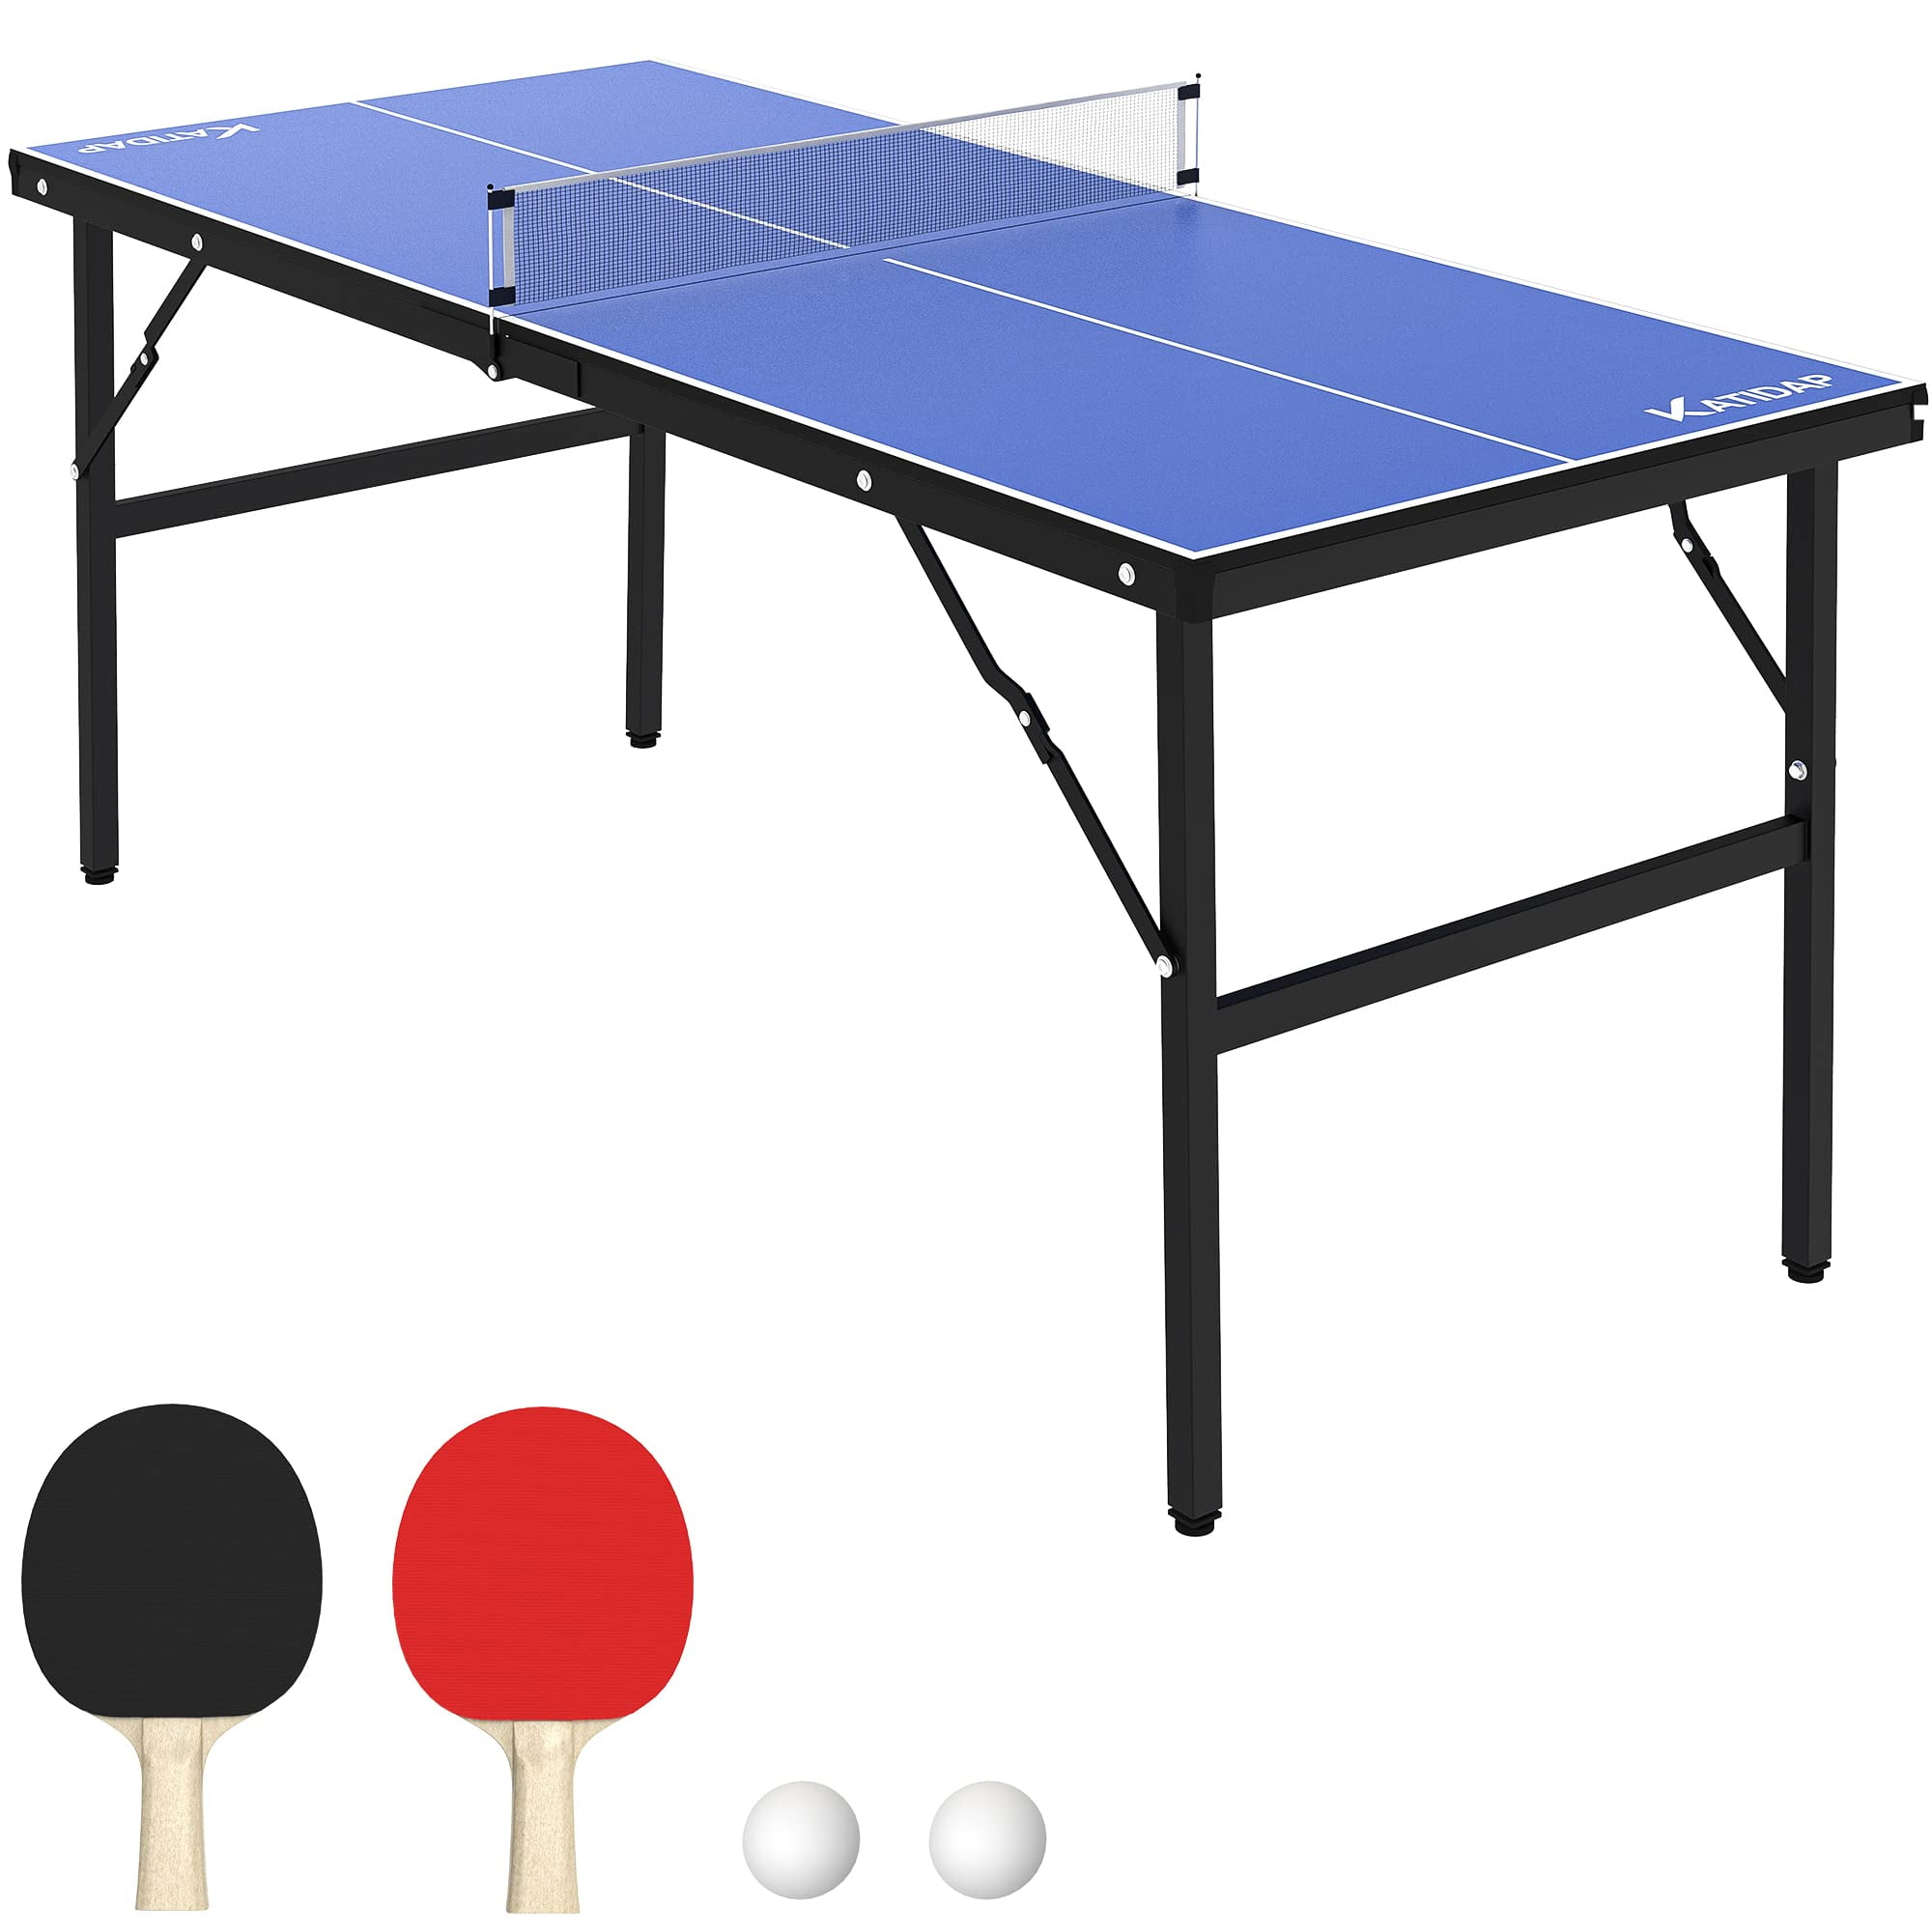 Portable Table Tennis Table, Mid-Size Ping Pong Table for Indoor Outdoor Foldable Table Tennis Table with Net, Blue, 60 x 26 x 27.5inch